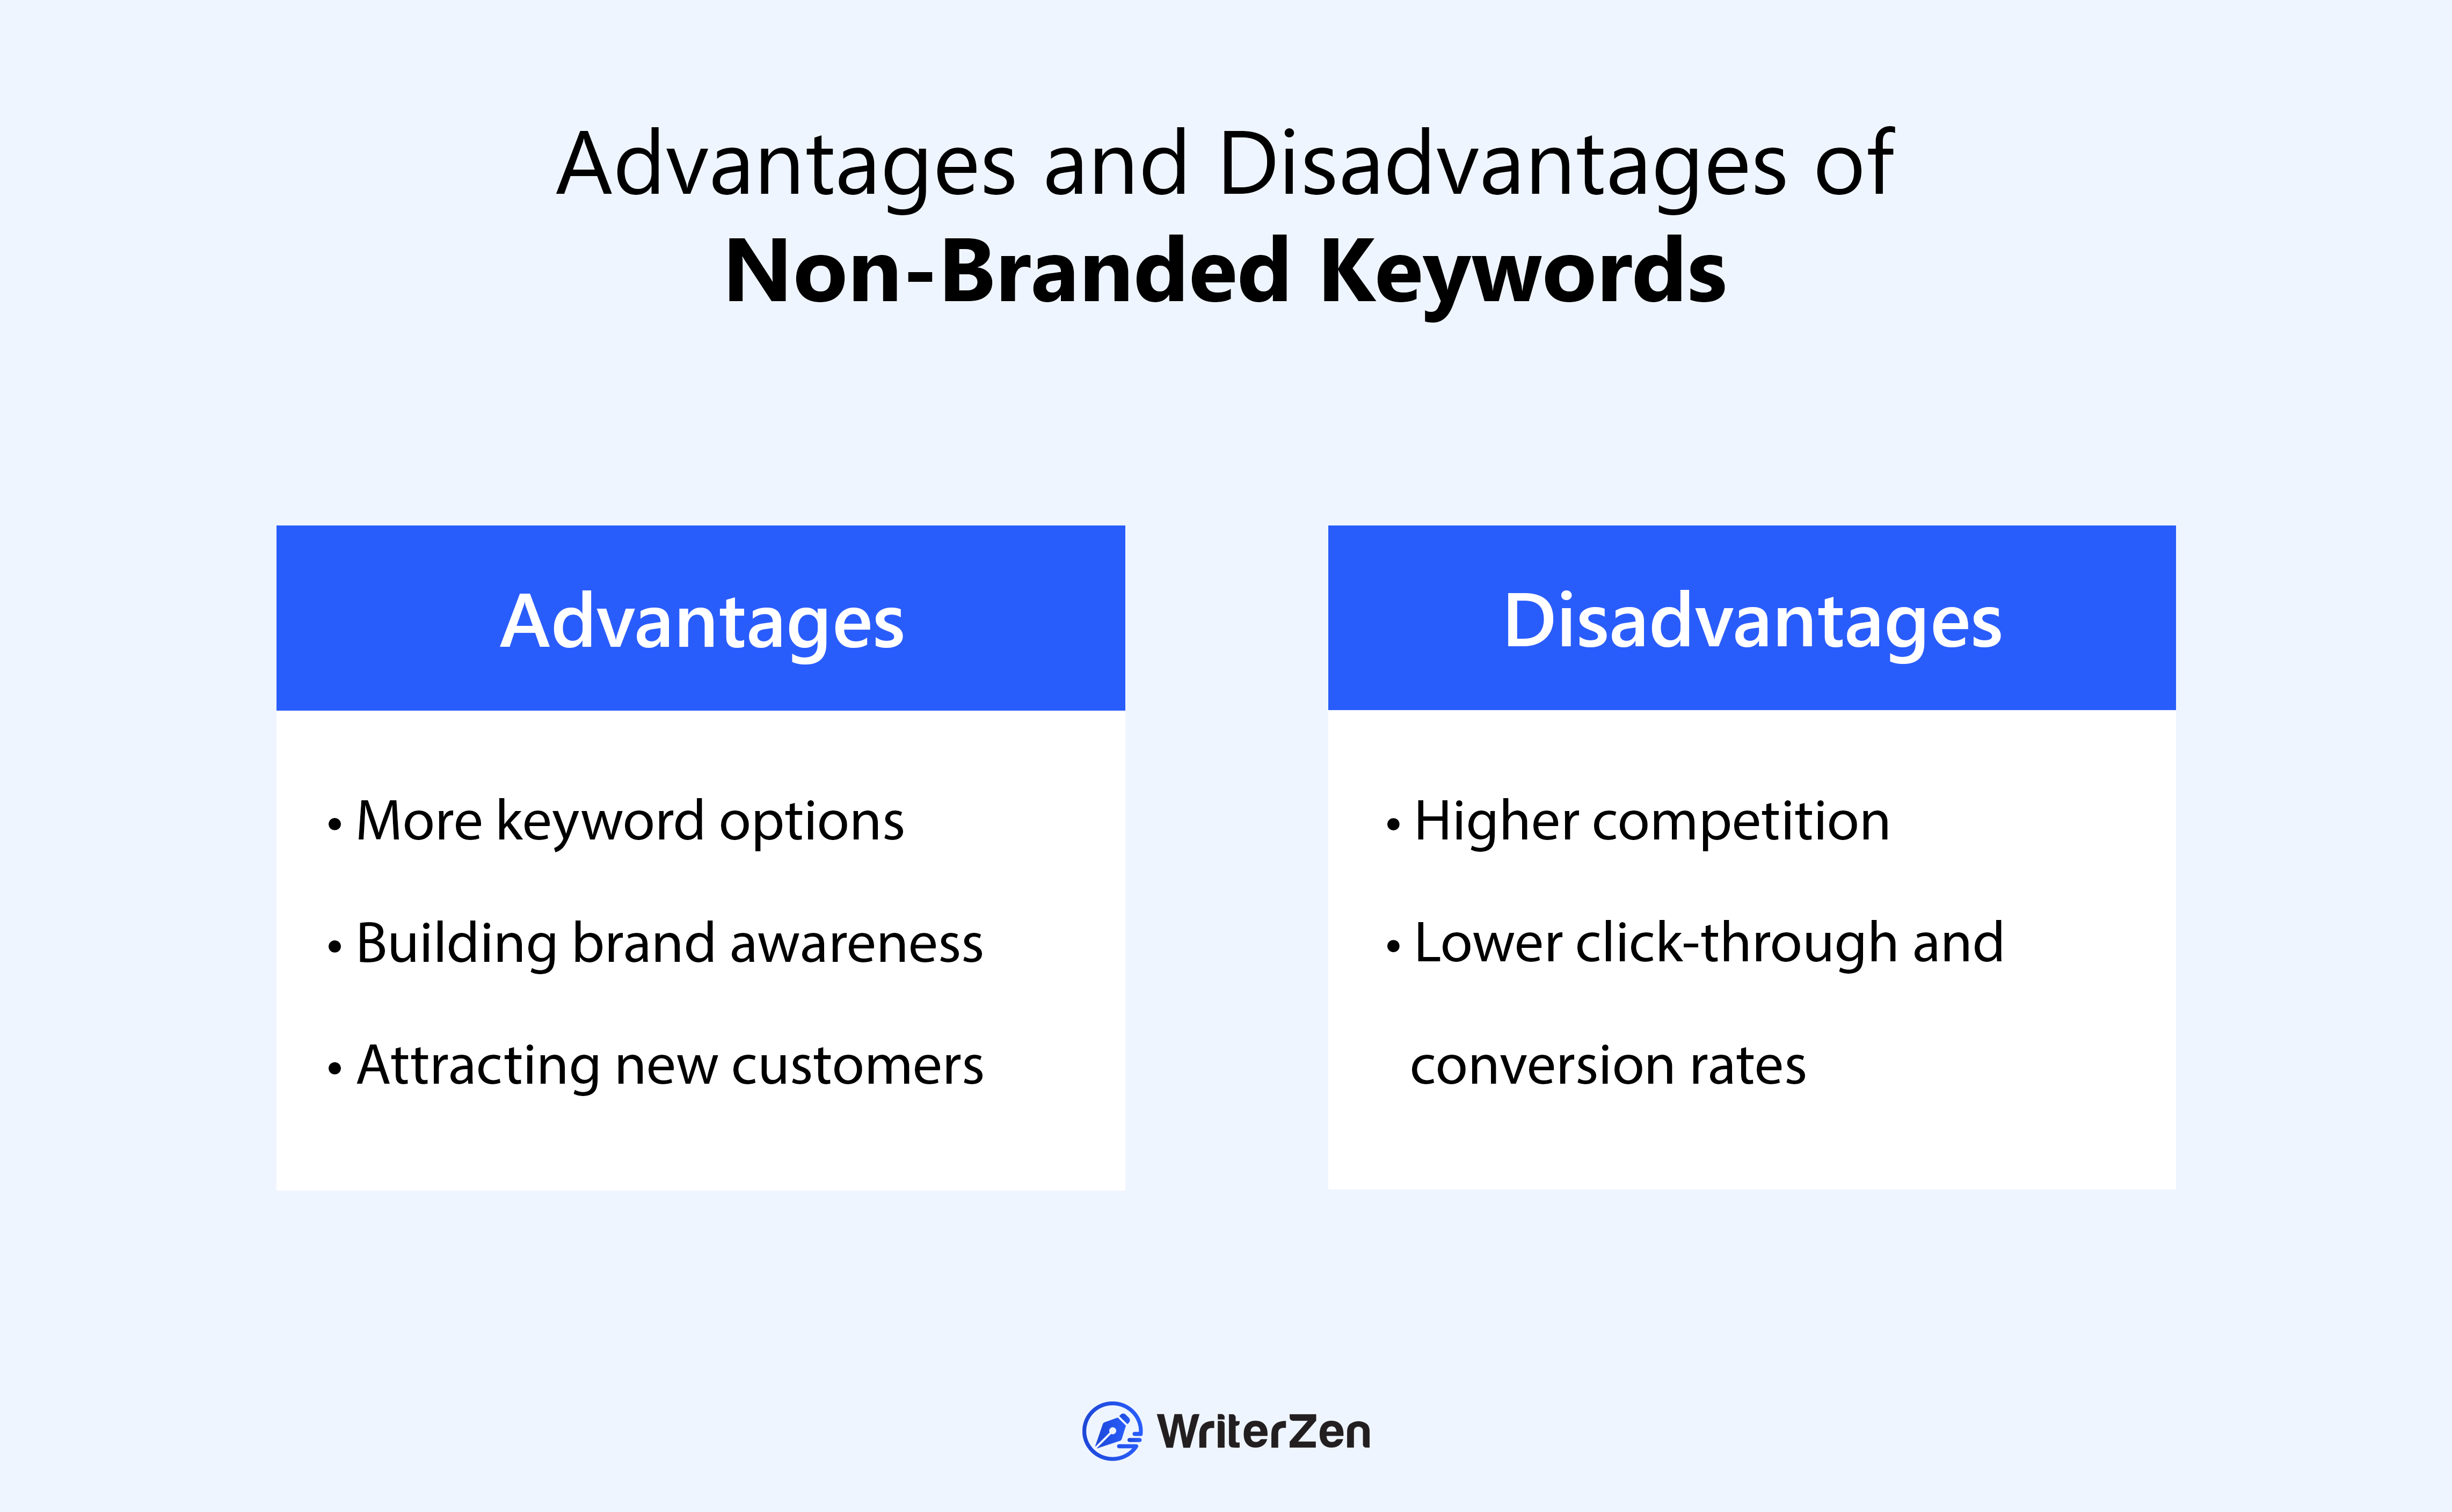 Benefits and Drawbacks of Non-Branded Keywords